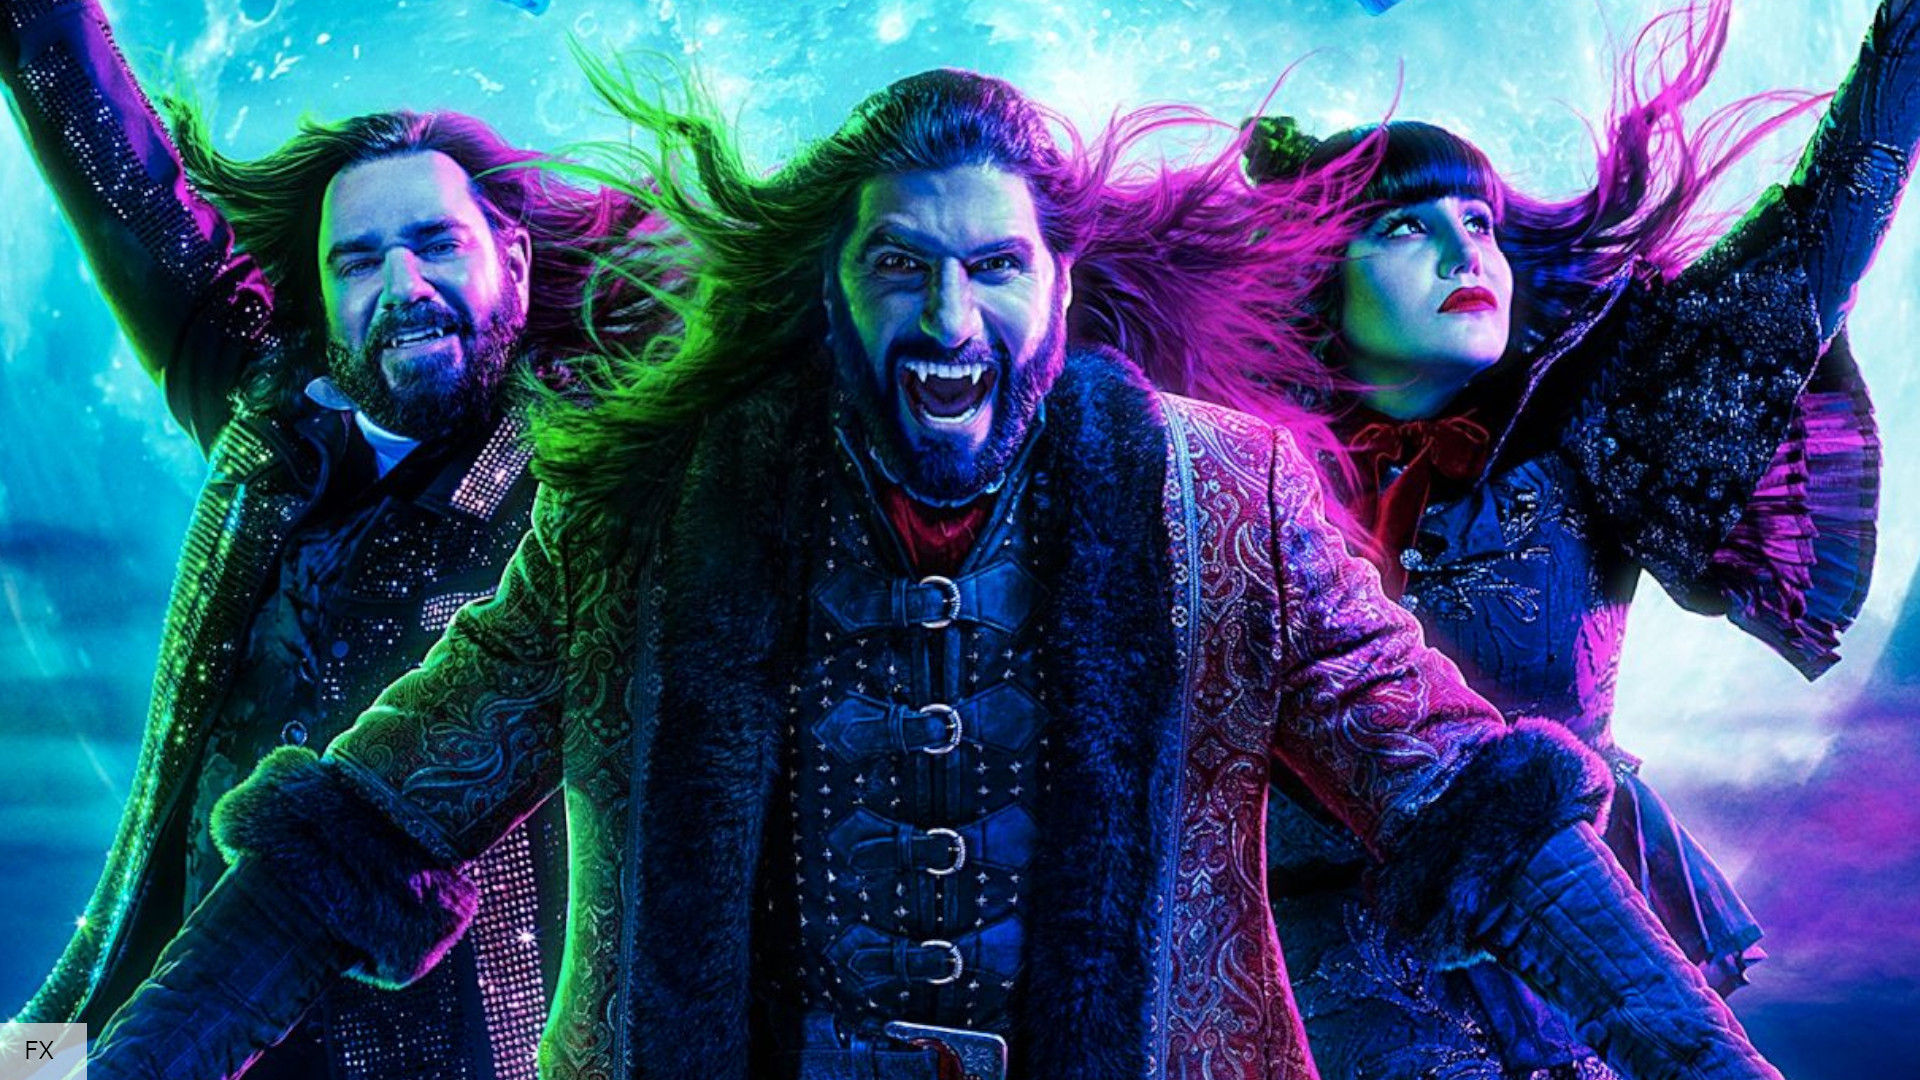 What We Do in the Shadows season 4 release date, cast, and more The